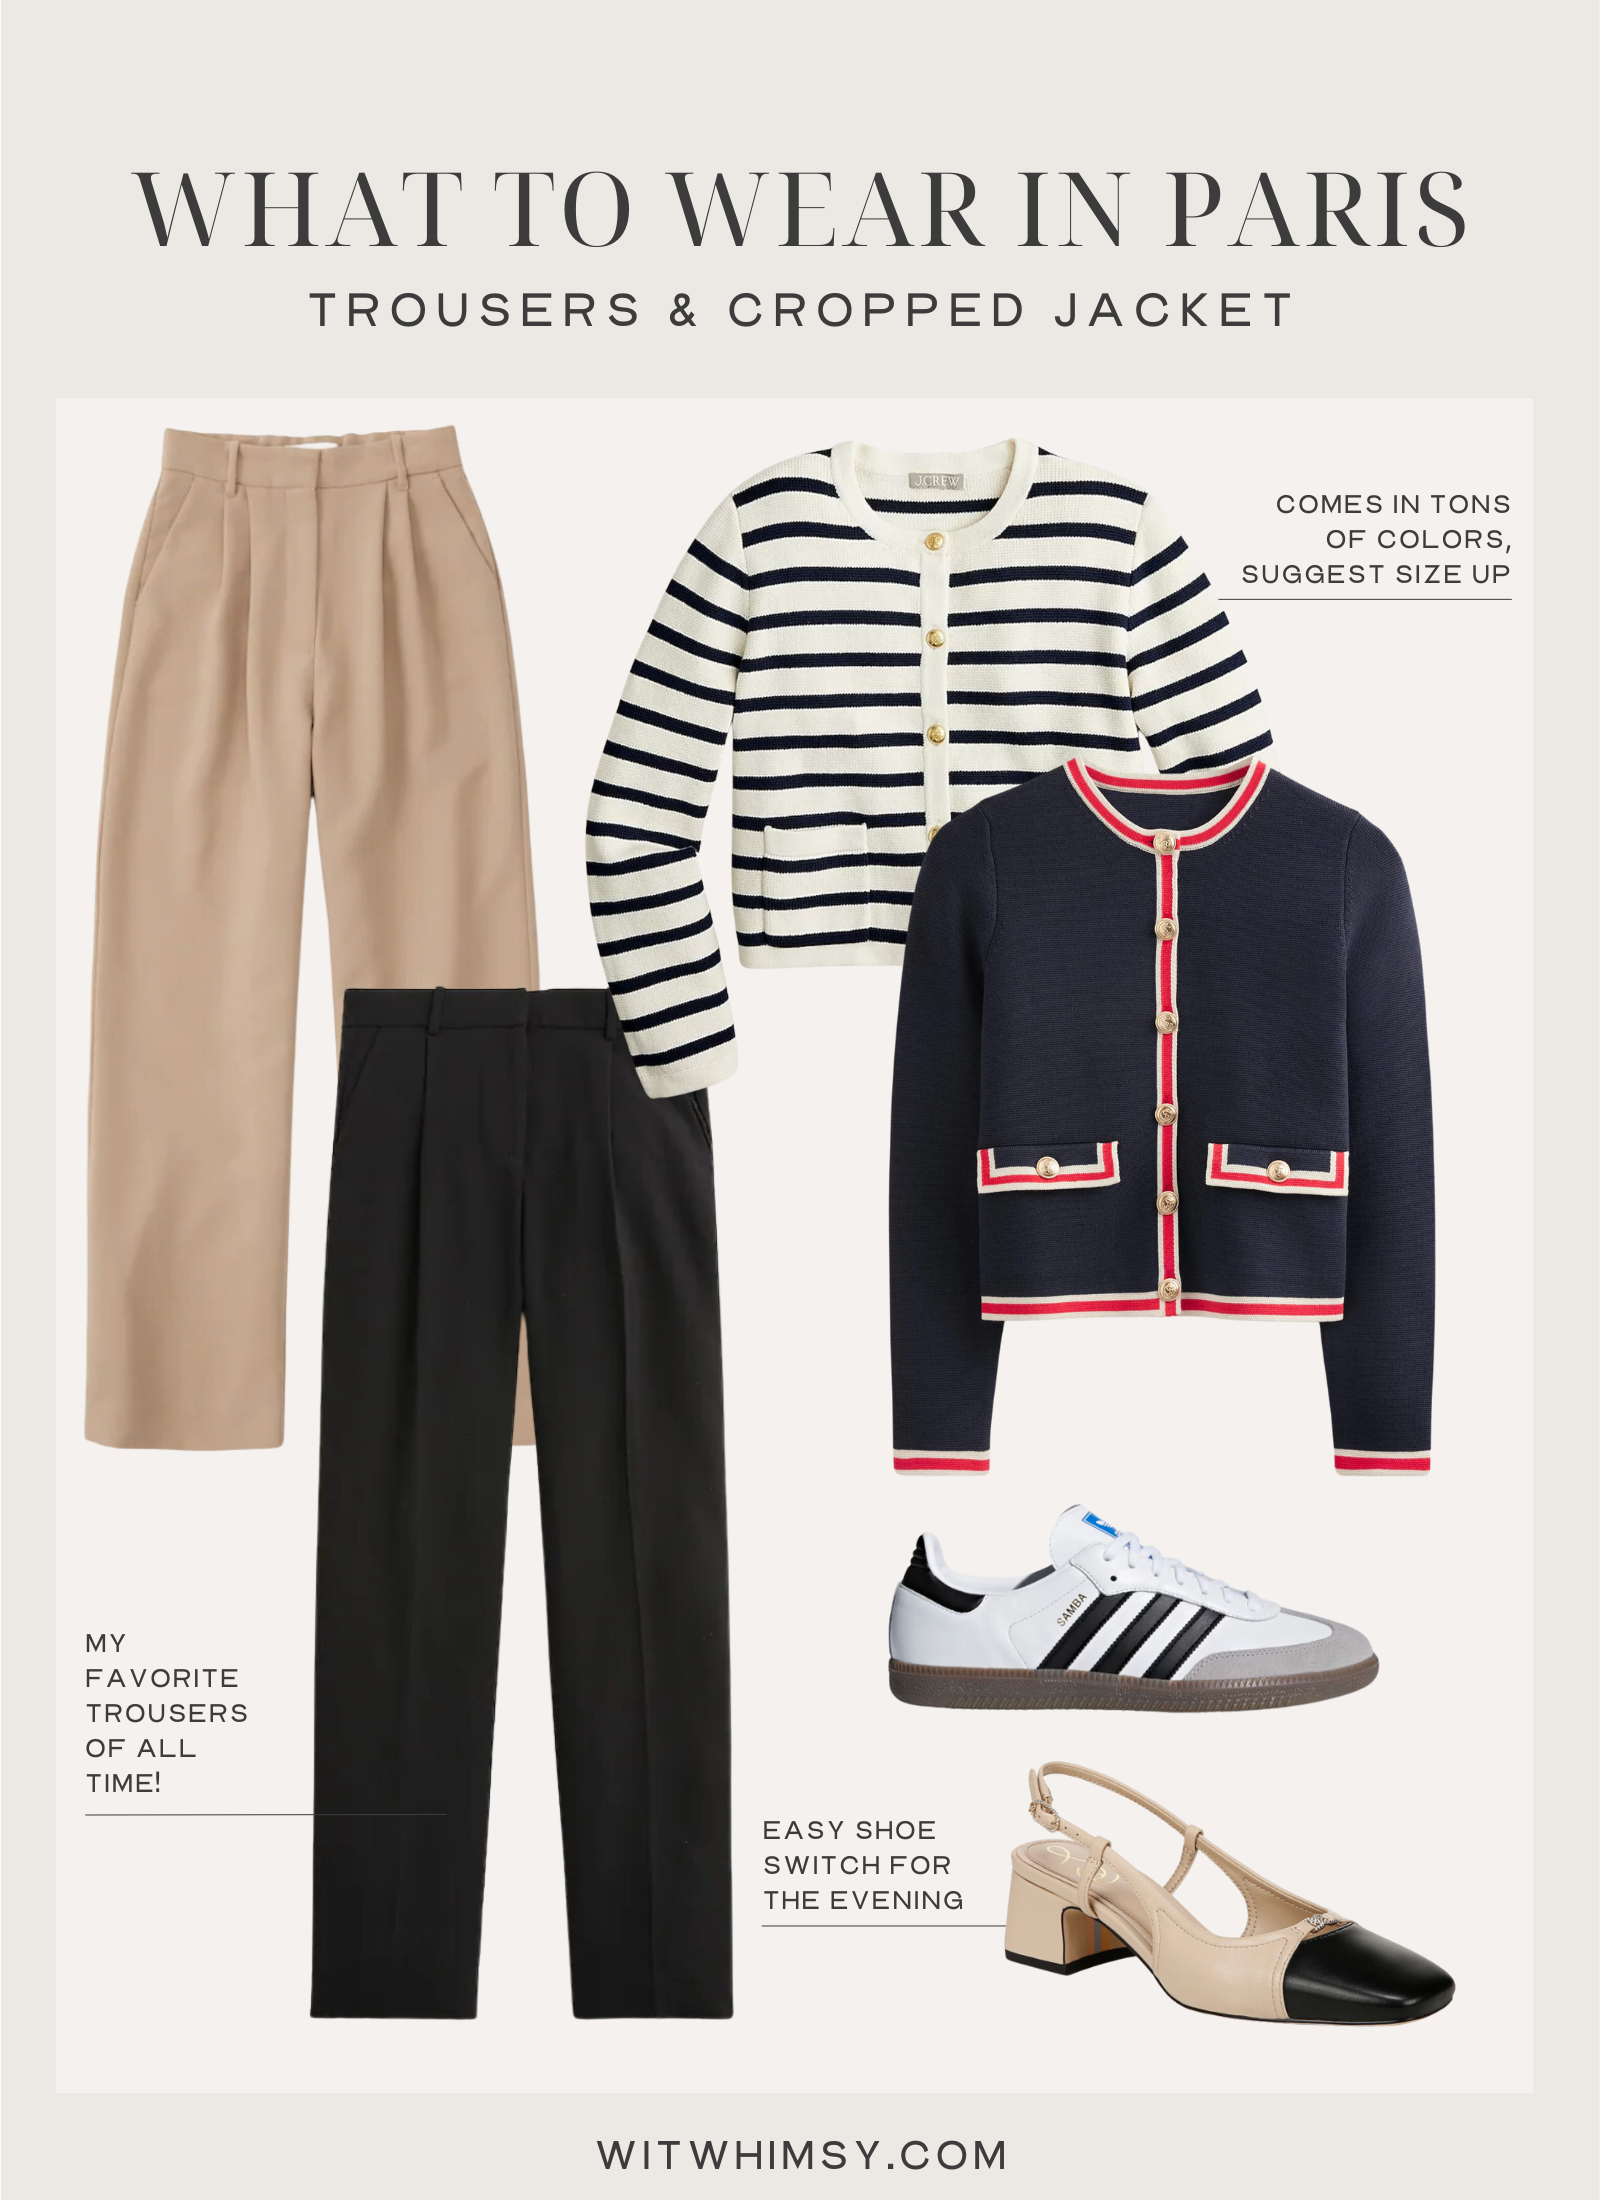 Outfit collage including trousers, lady sweater jackets, Adidas Sambas and a pair of slingback heels